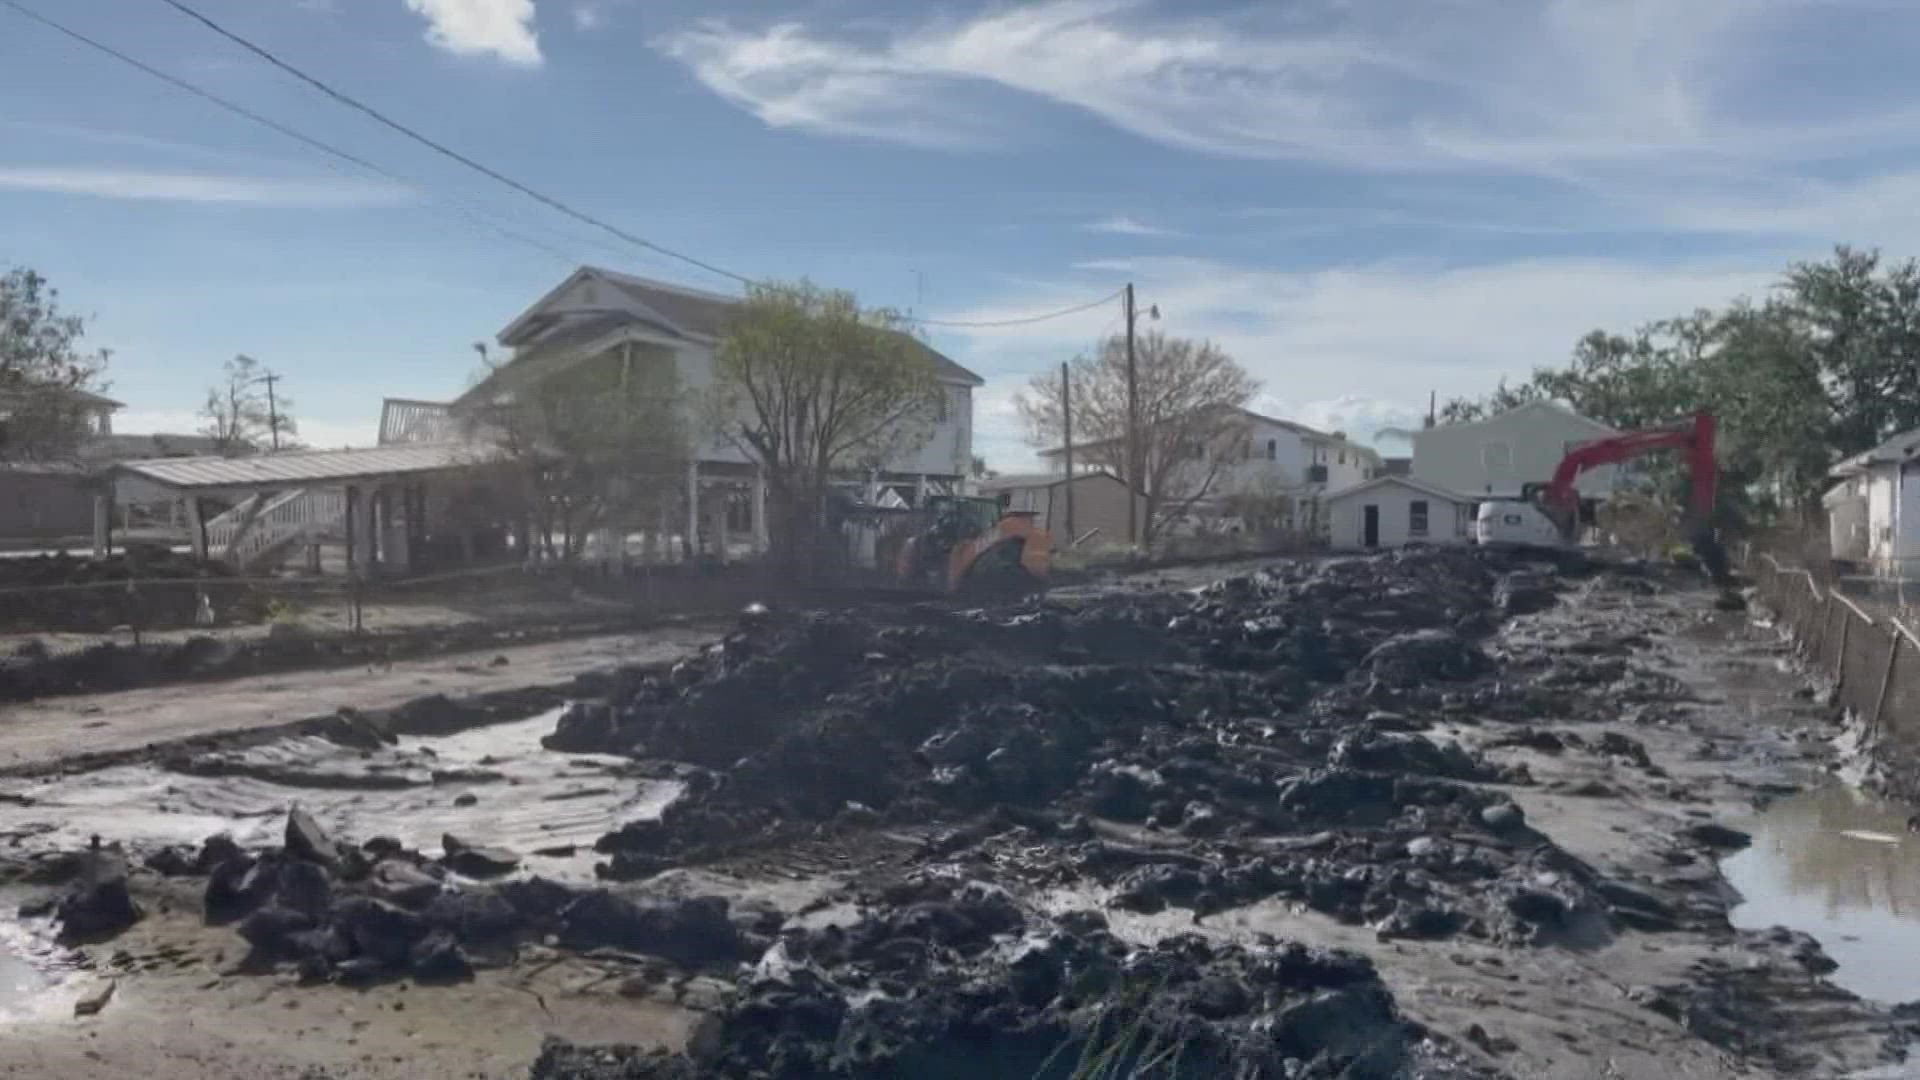 More than a month after Ida lower jefferson residents are still struggling with thick smelly mud smeared across the area.